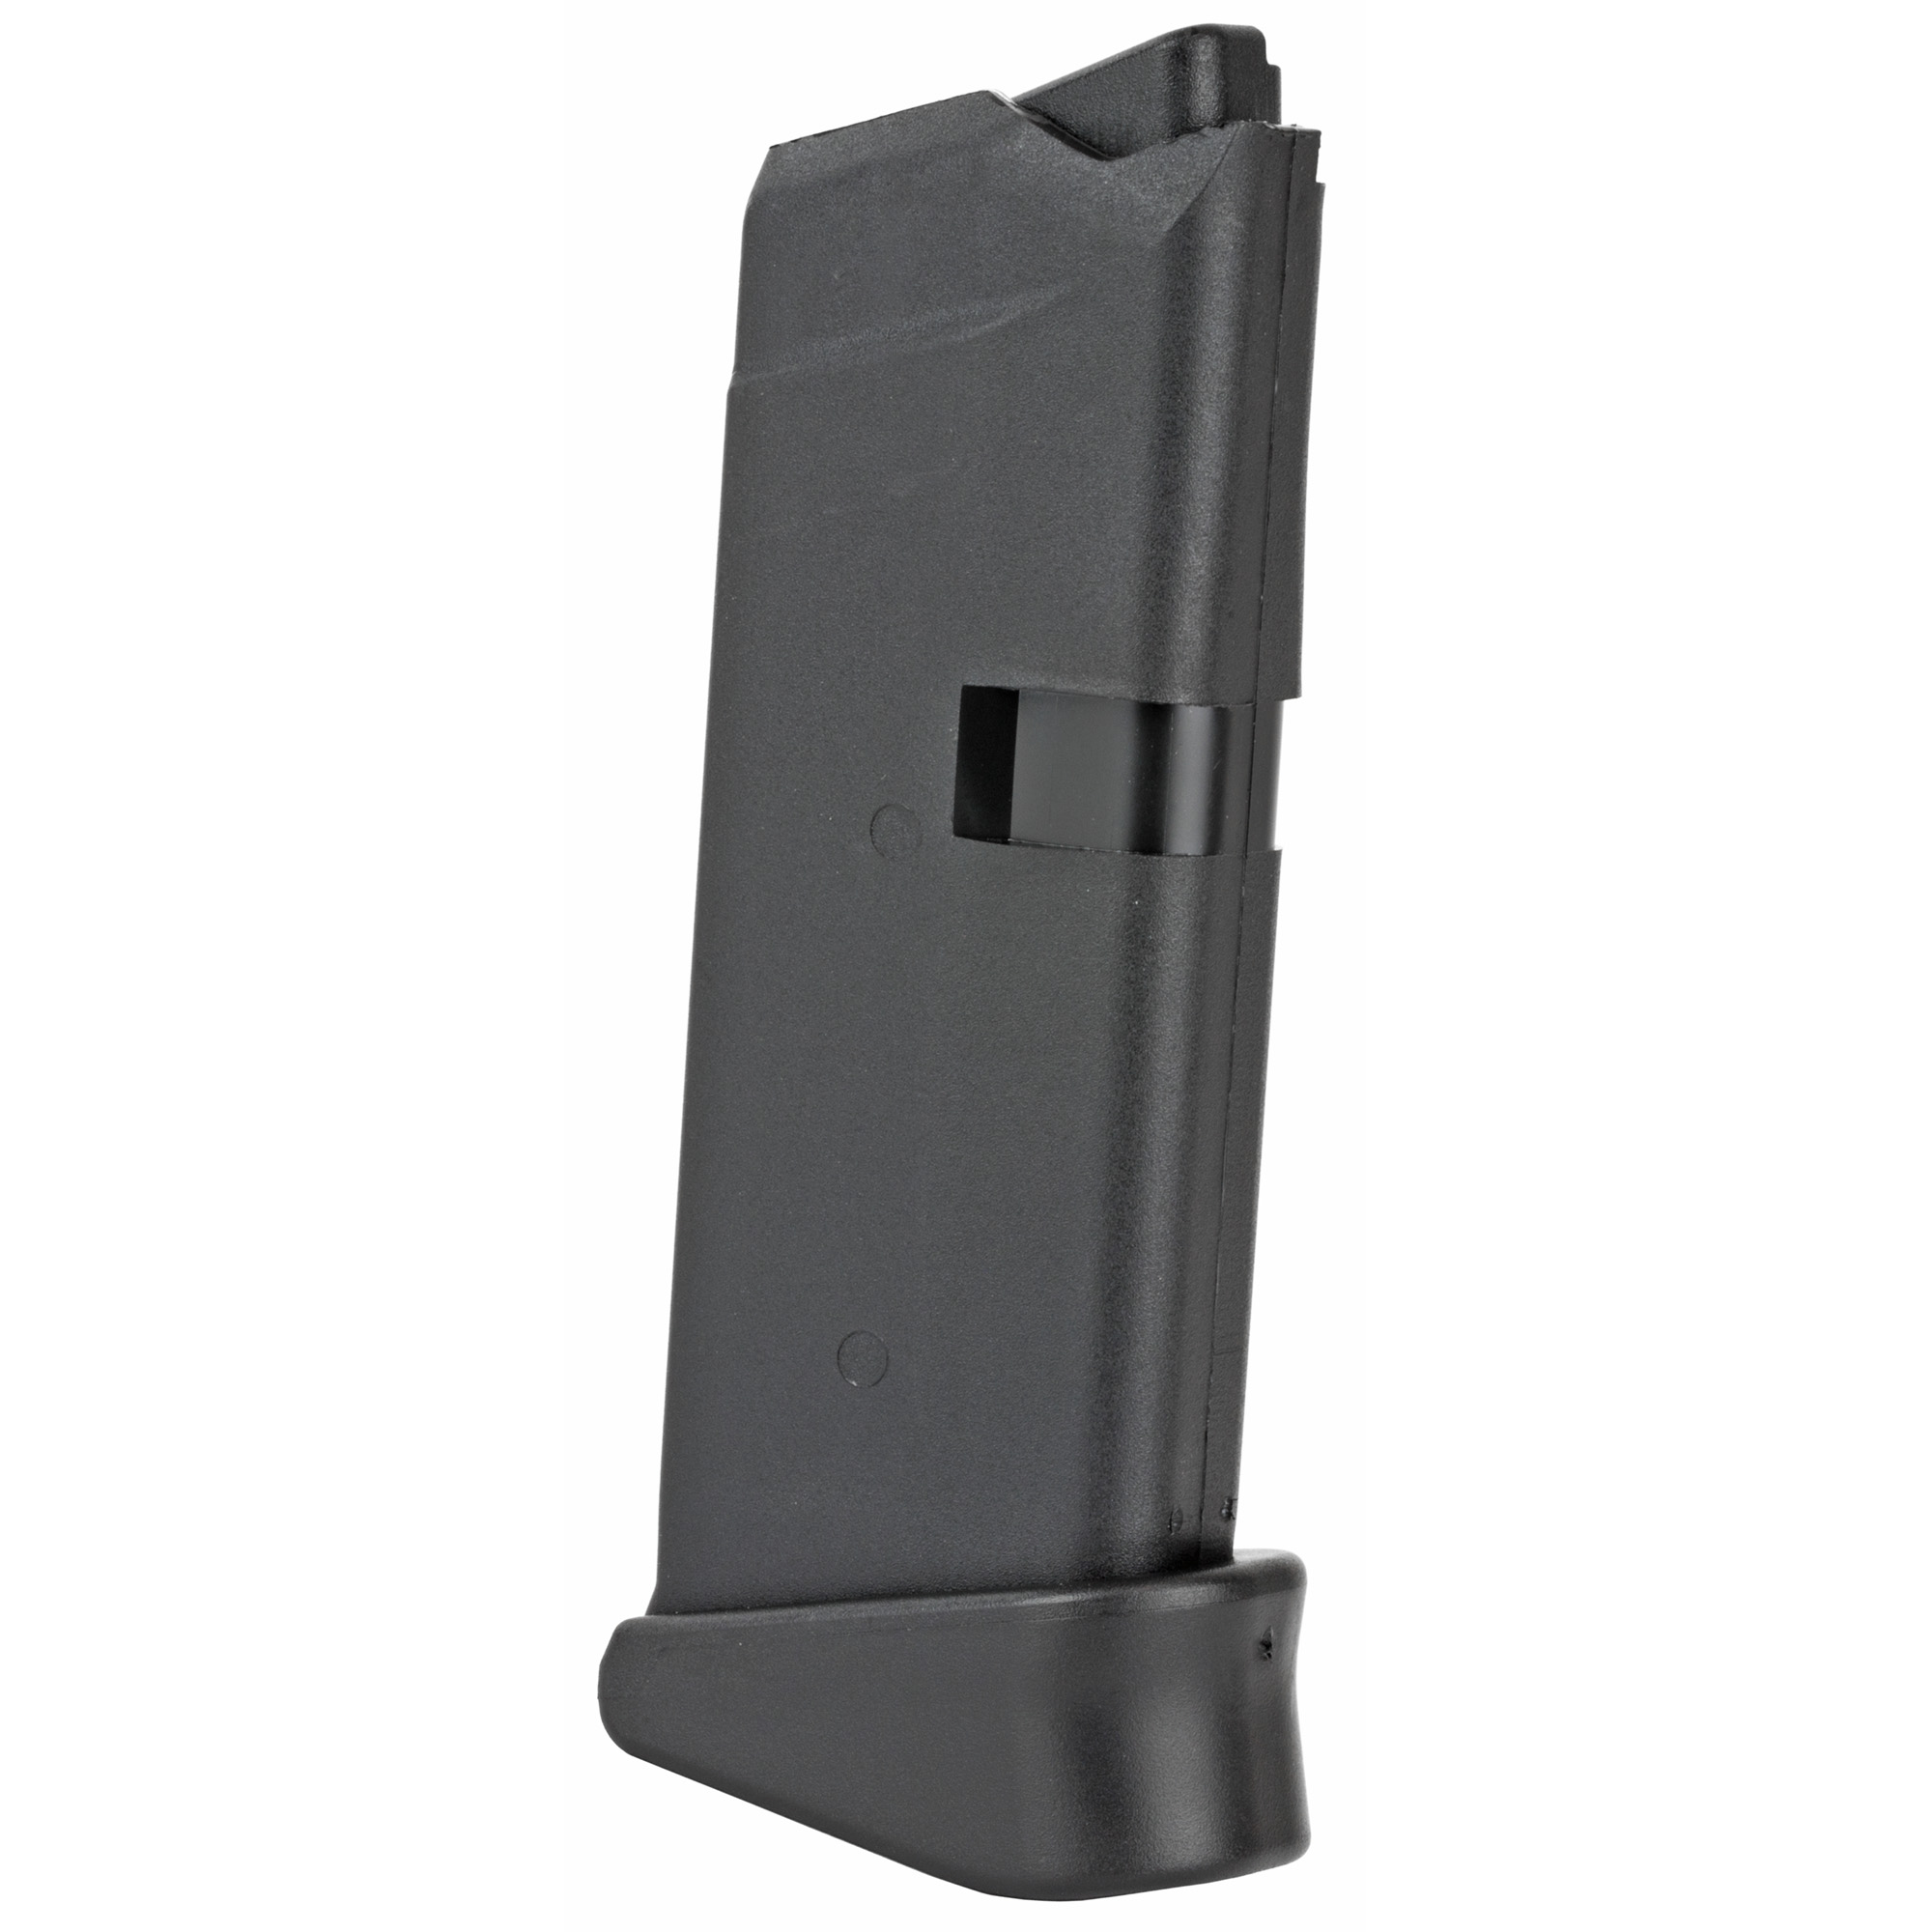 Glock OEM Factory Magazine Glock 42 with Finger Extension, 380 ACP 6-Round Polymer Black (MF08833) 764503911576